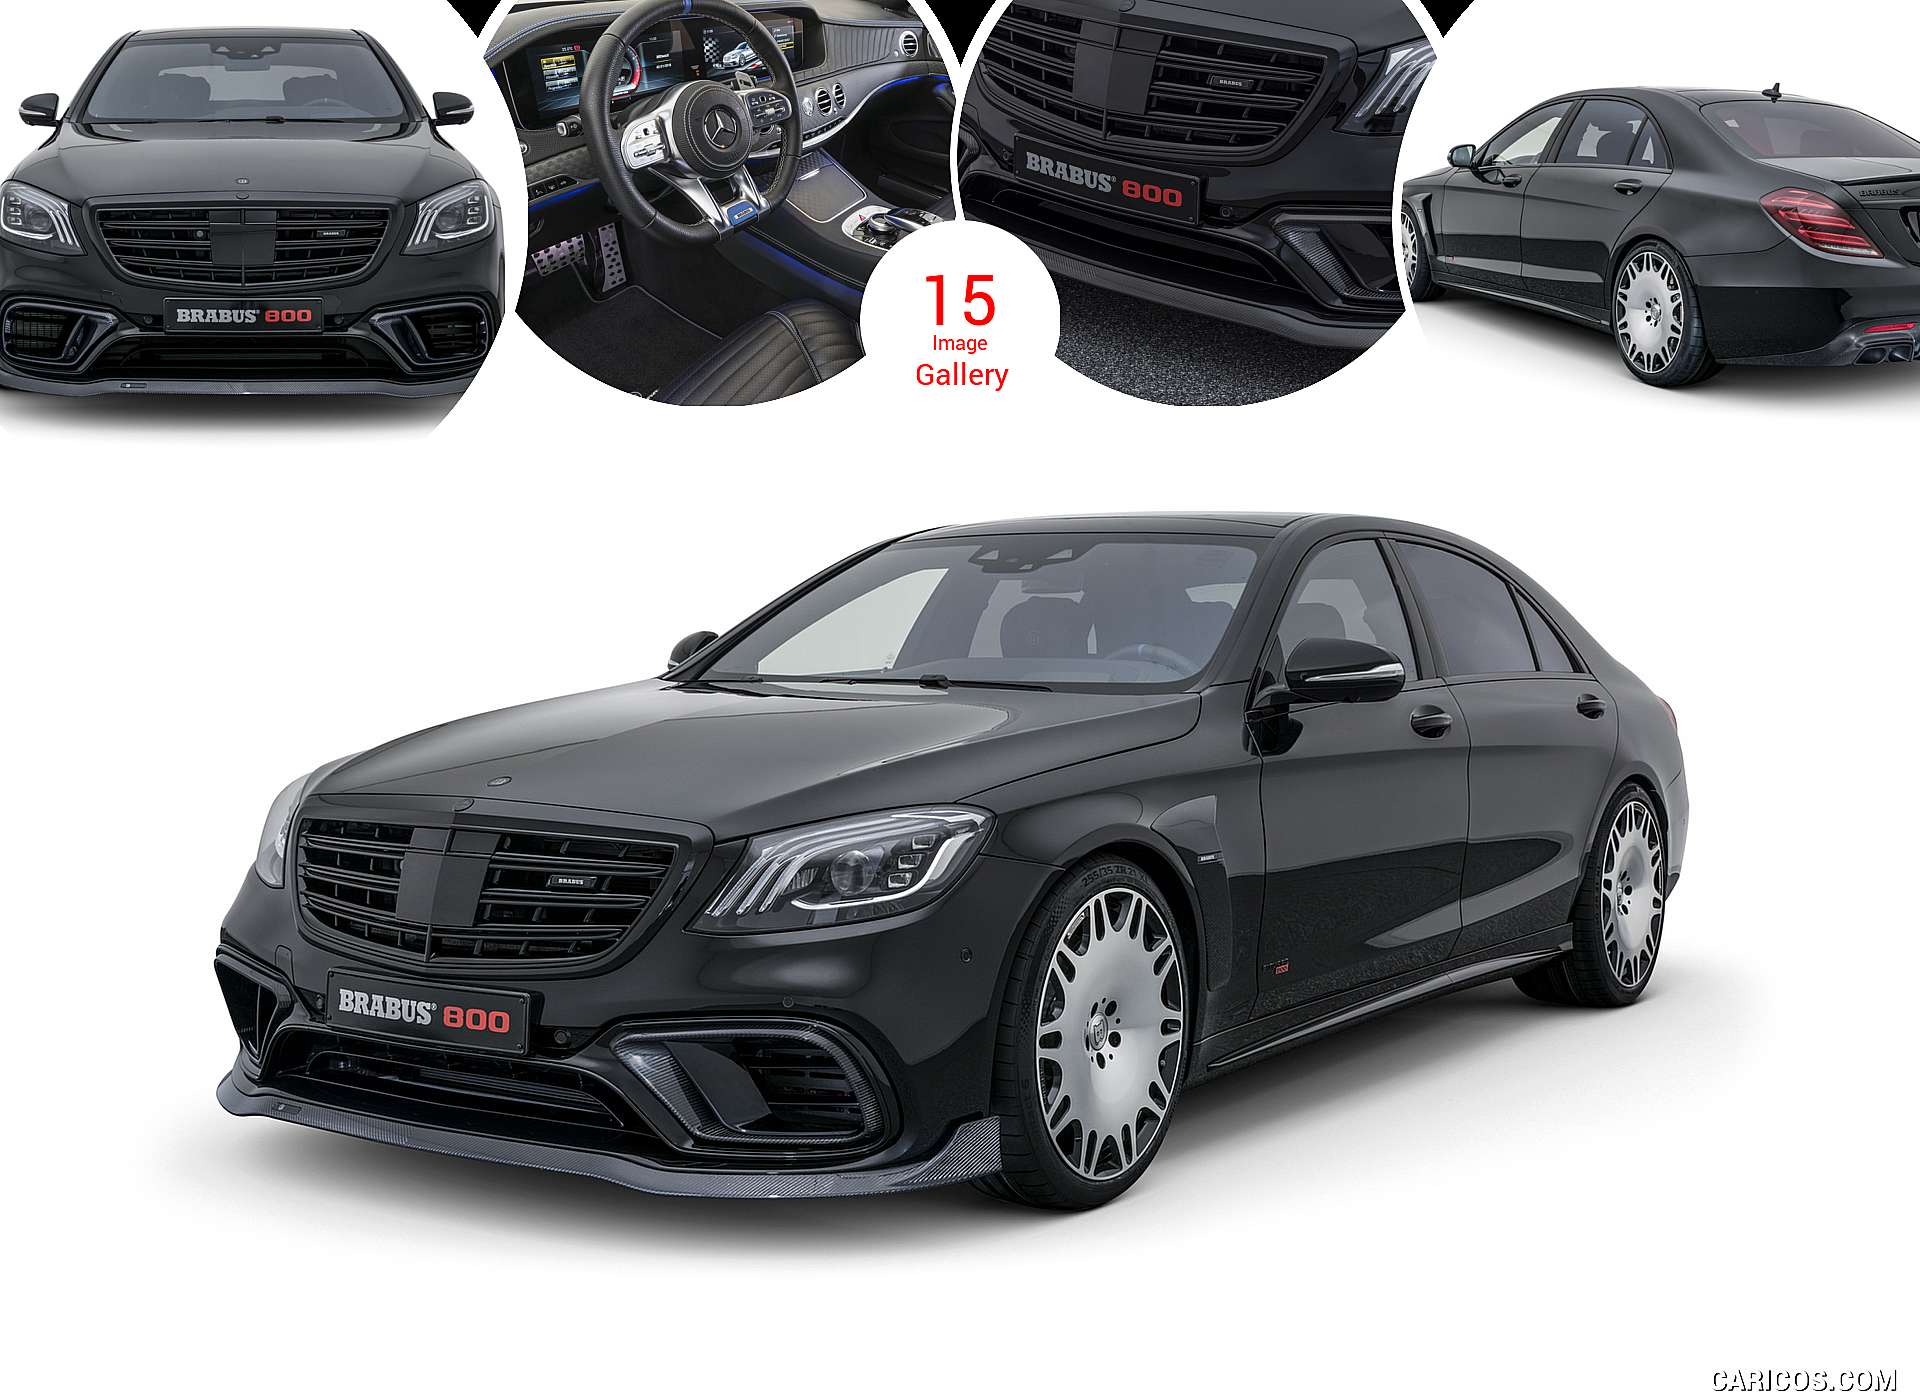 2018 BRABUS 800 Coupe based on Mercedes-AMG S 63 4MATIC 